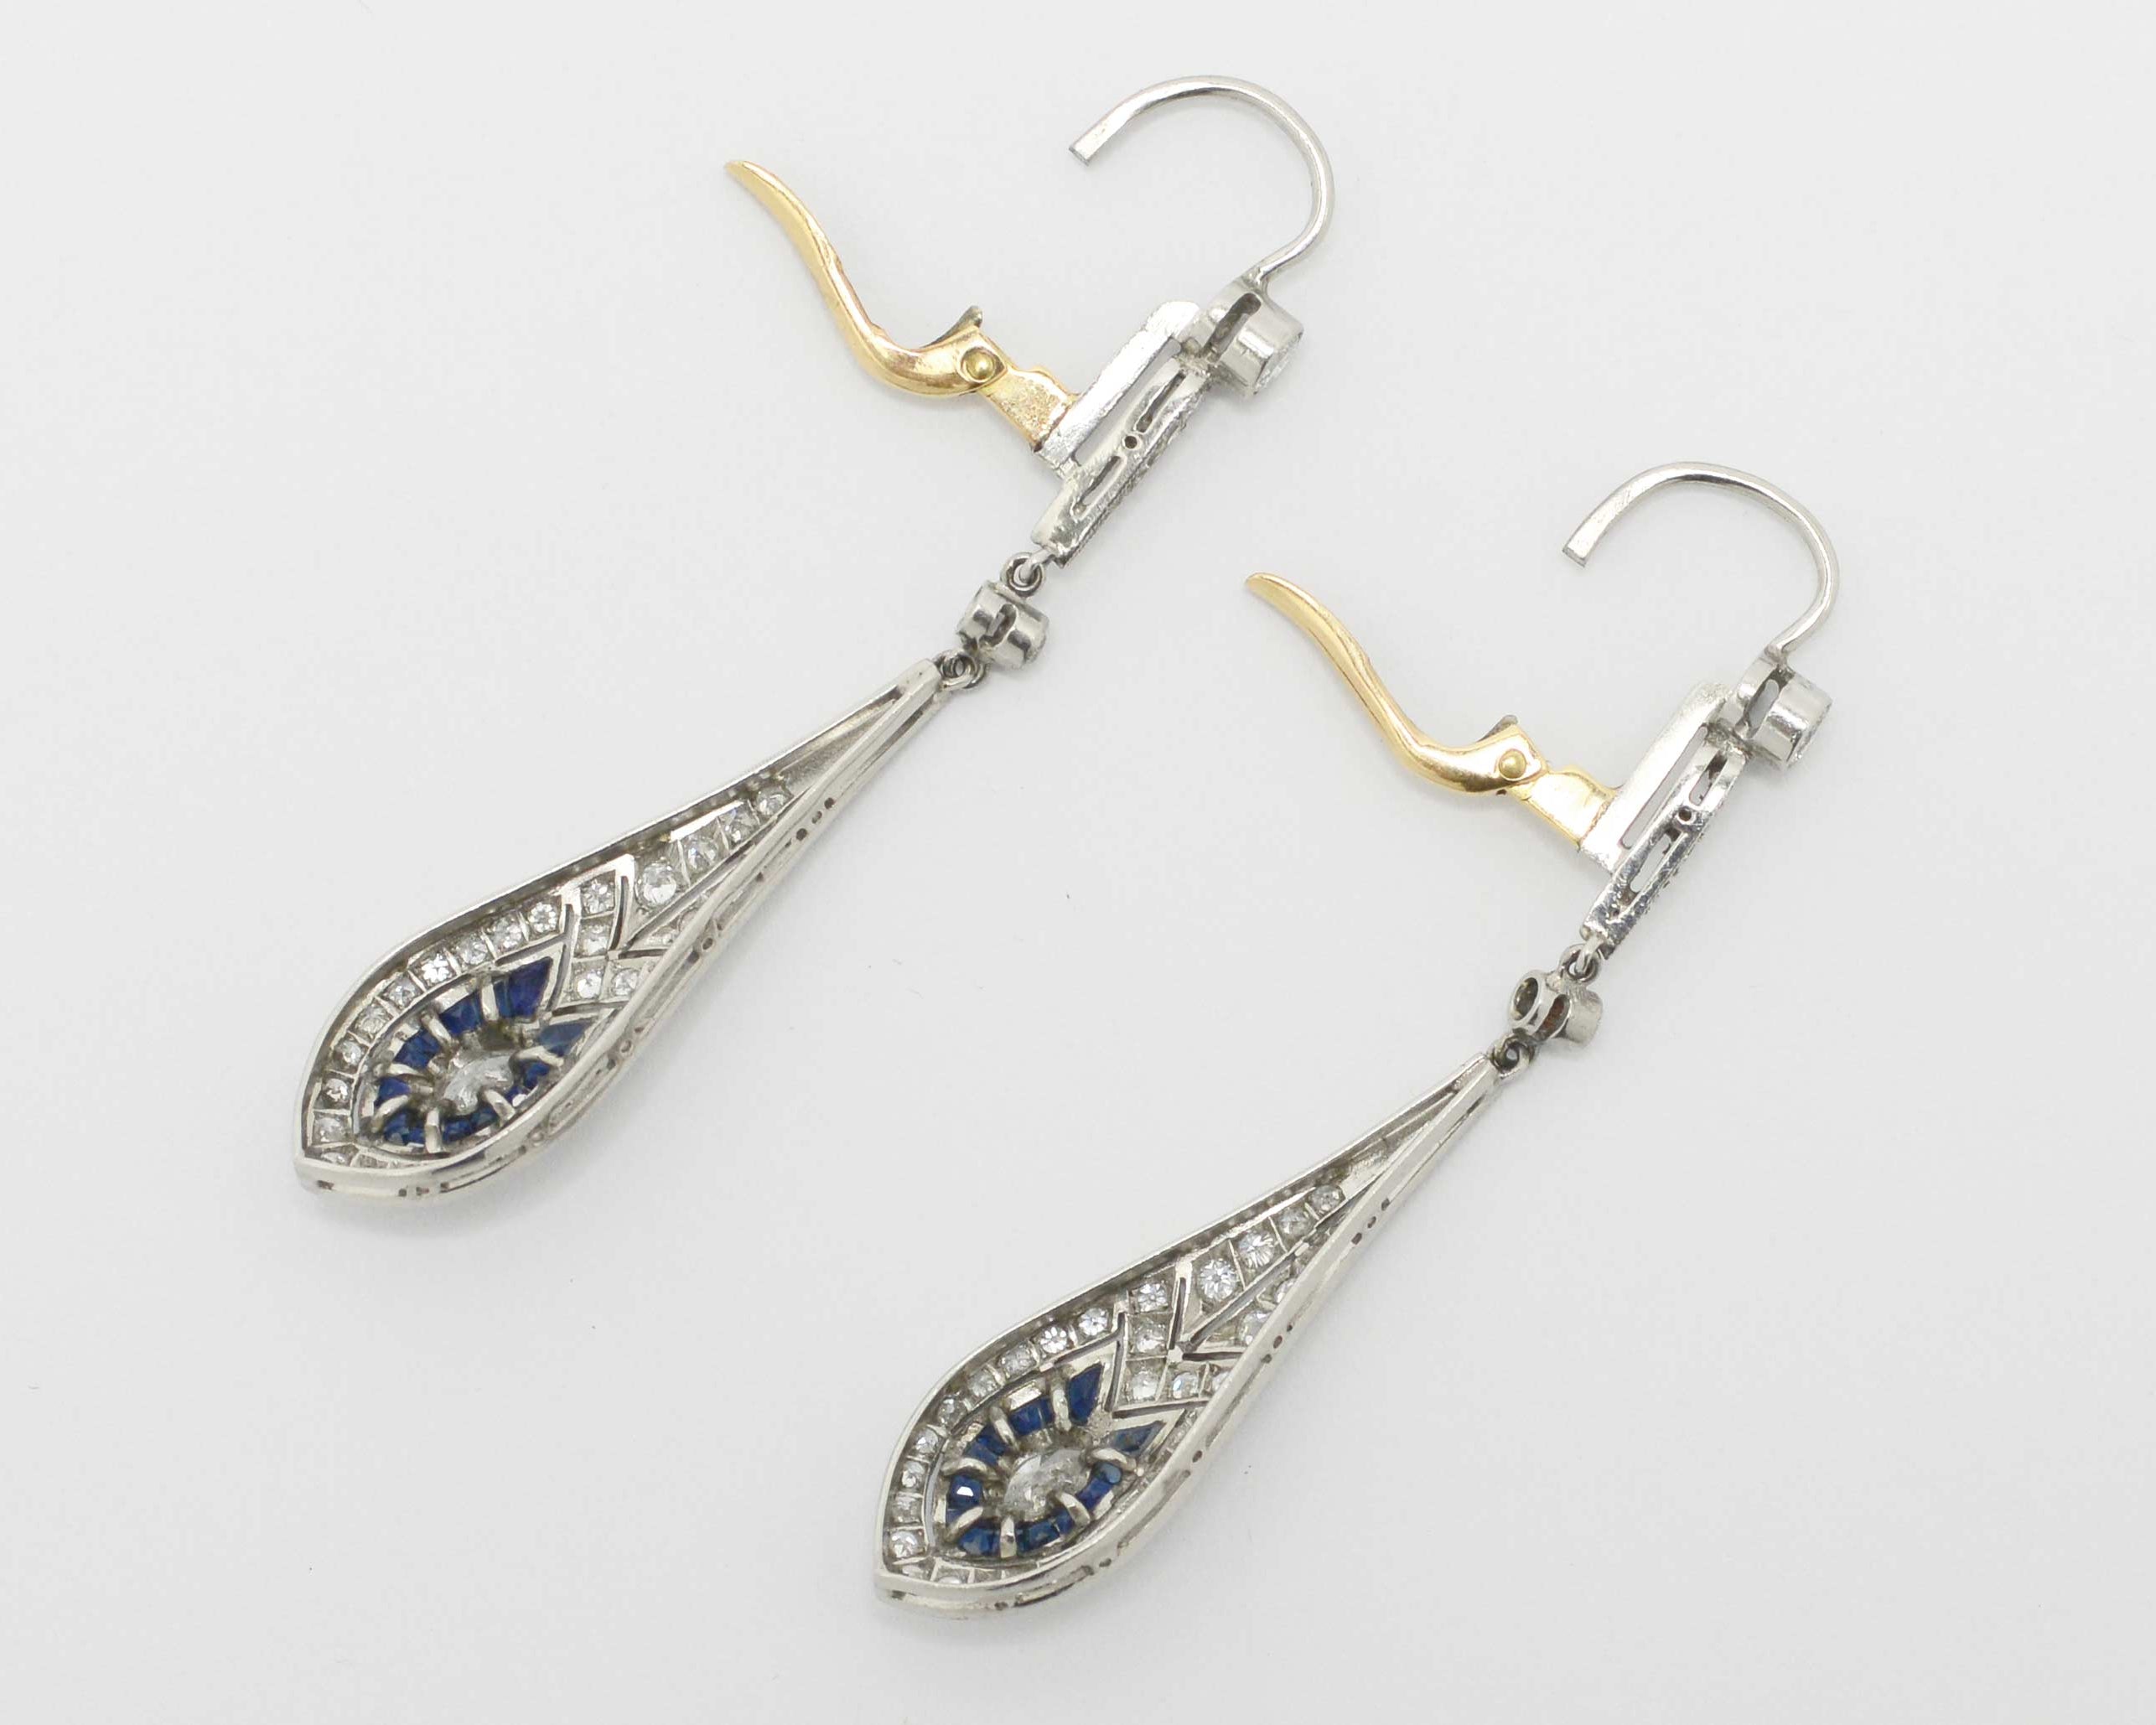 The levers of these diamond and sapphire dangle earrings are made of 18k gold.